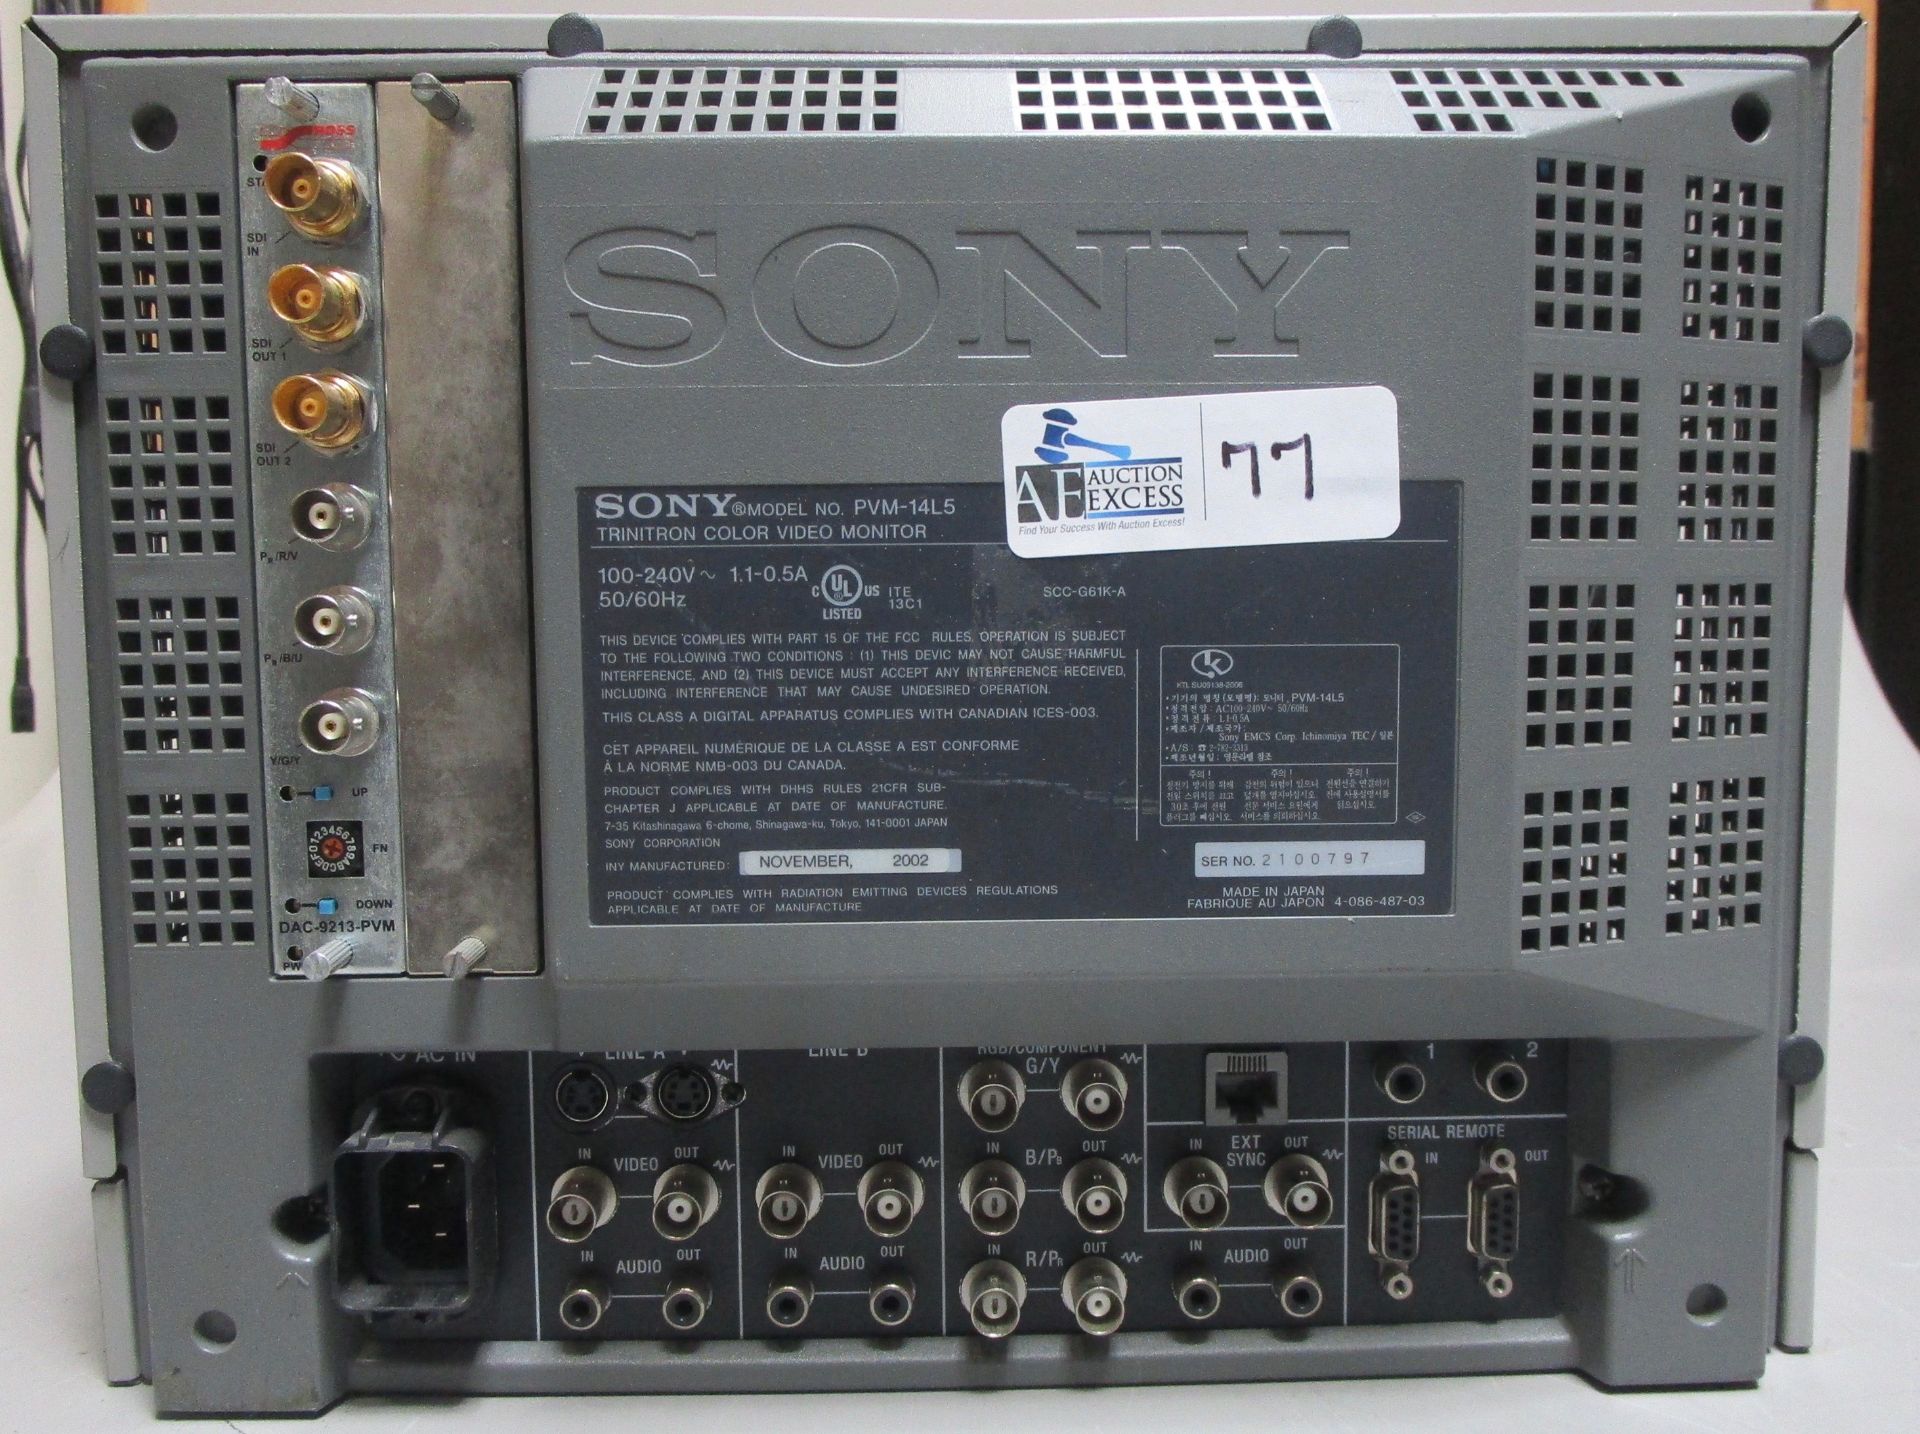 SONY PVM-14L5 CRT COLOR MONITOR - Image 2 of 2